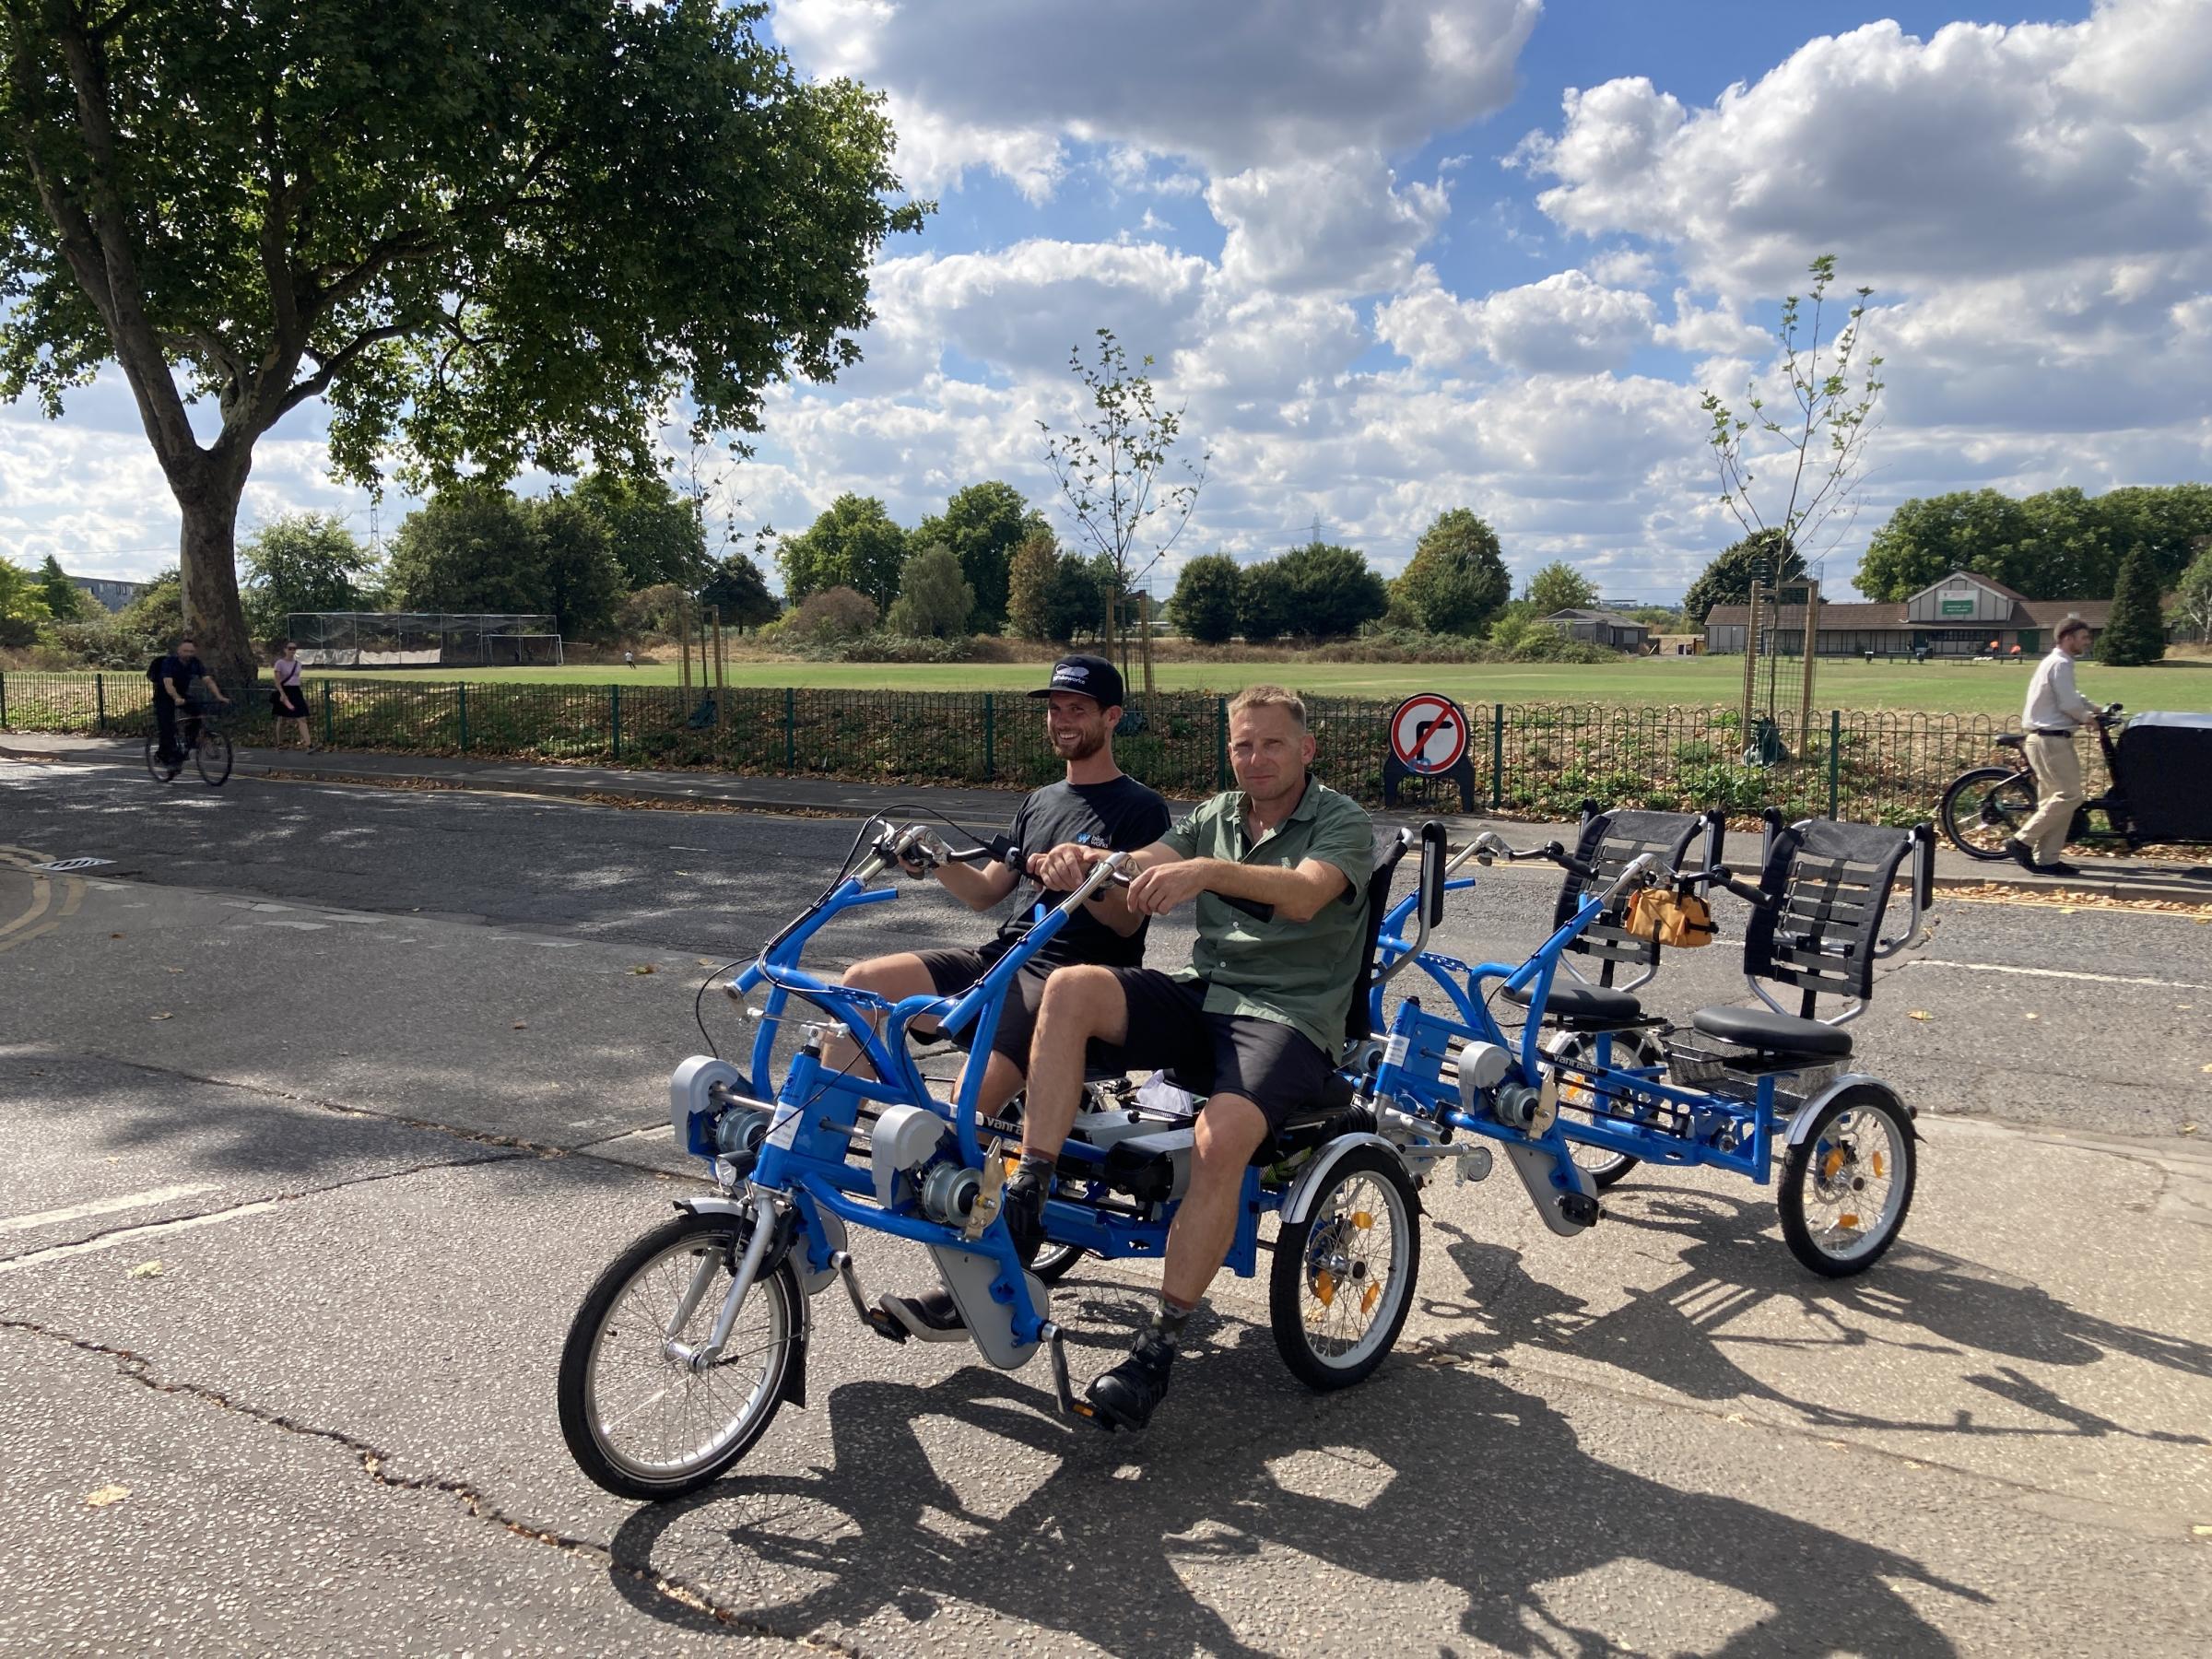 Bikeworks free ebike taxi service opens in Waltham Forest